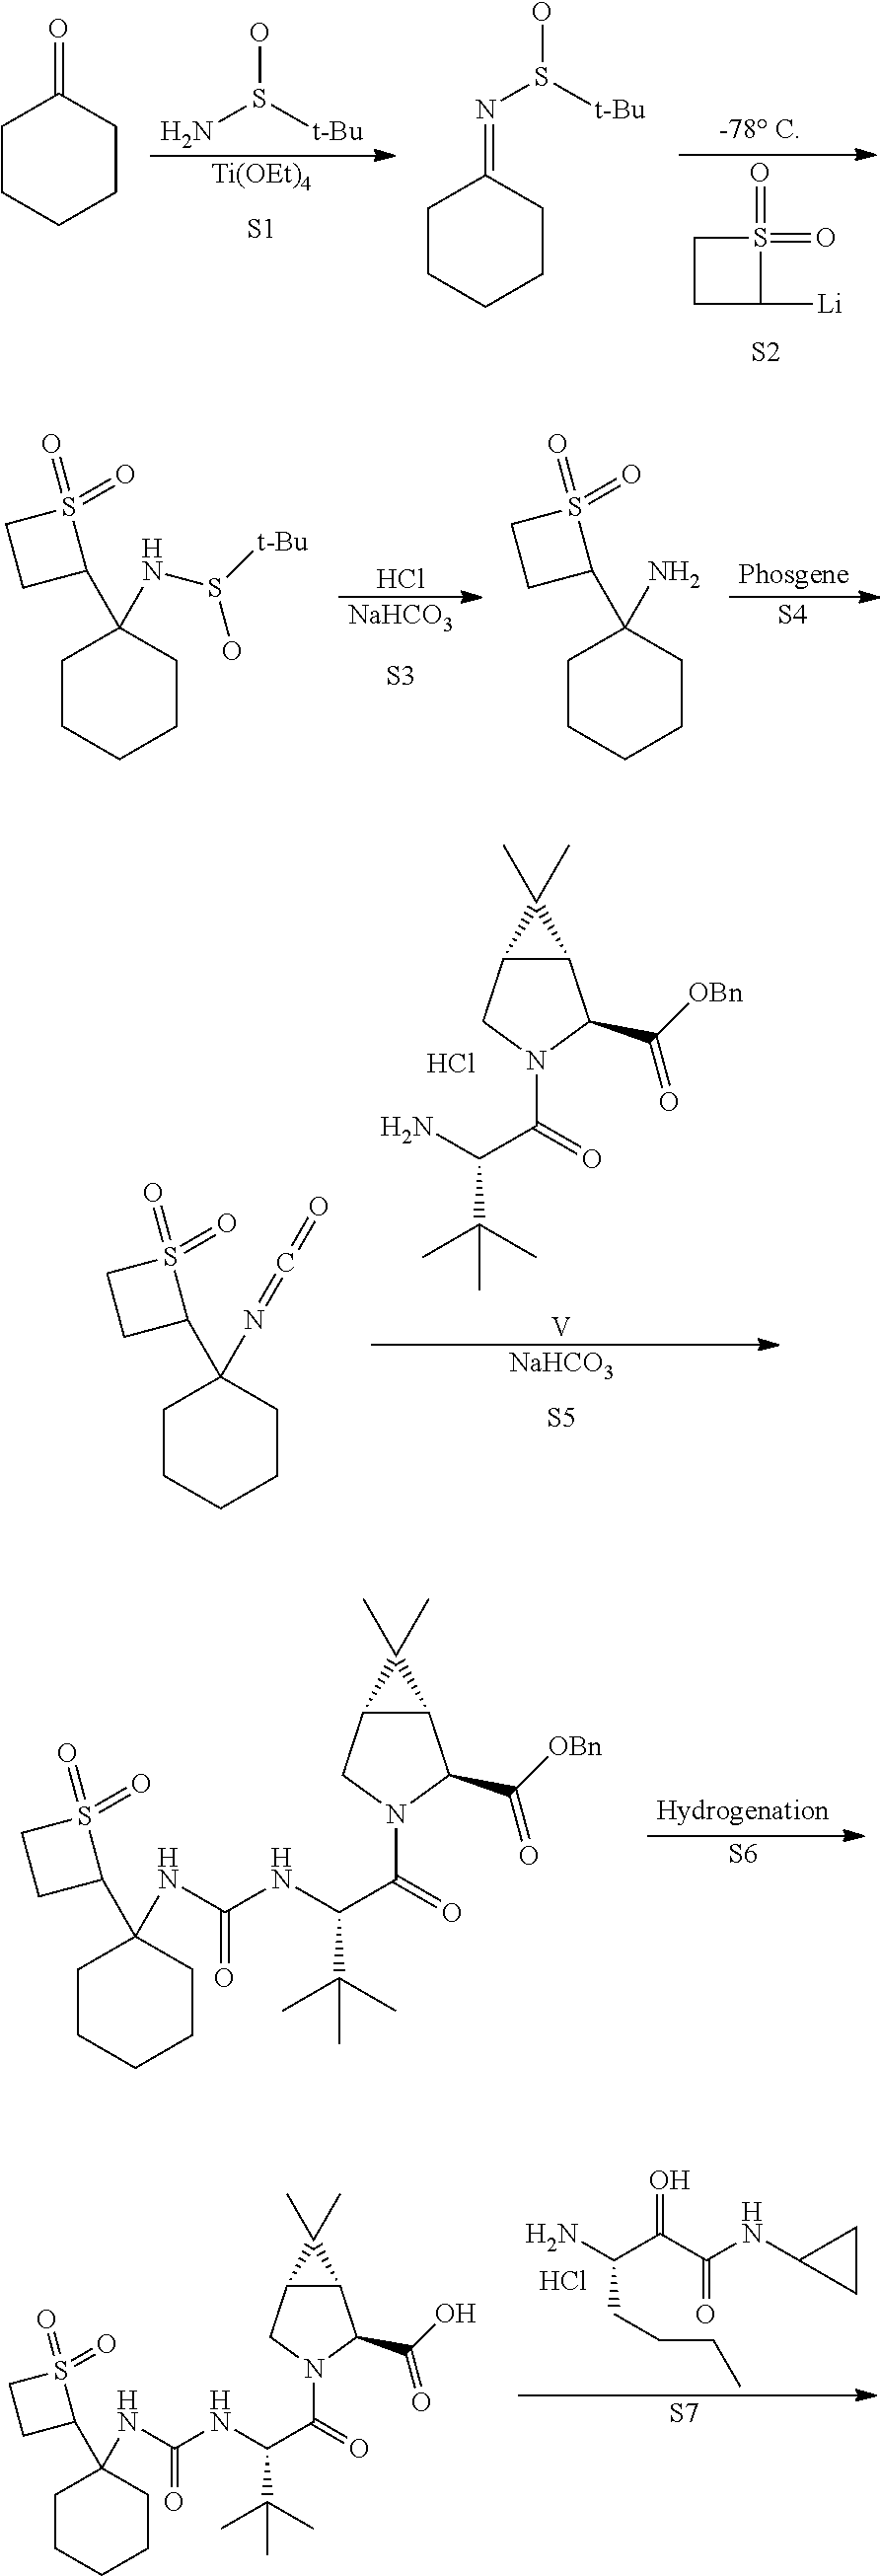 Enantio- and stereo specific synthesis of β-amino-α-hydroxy amides